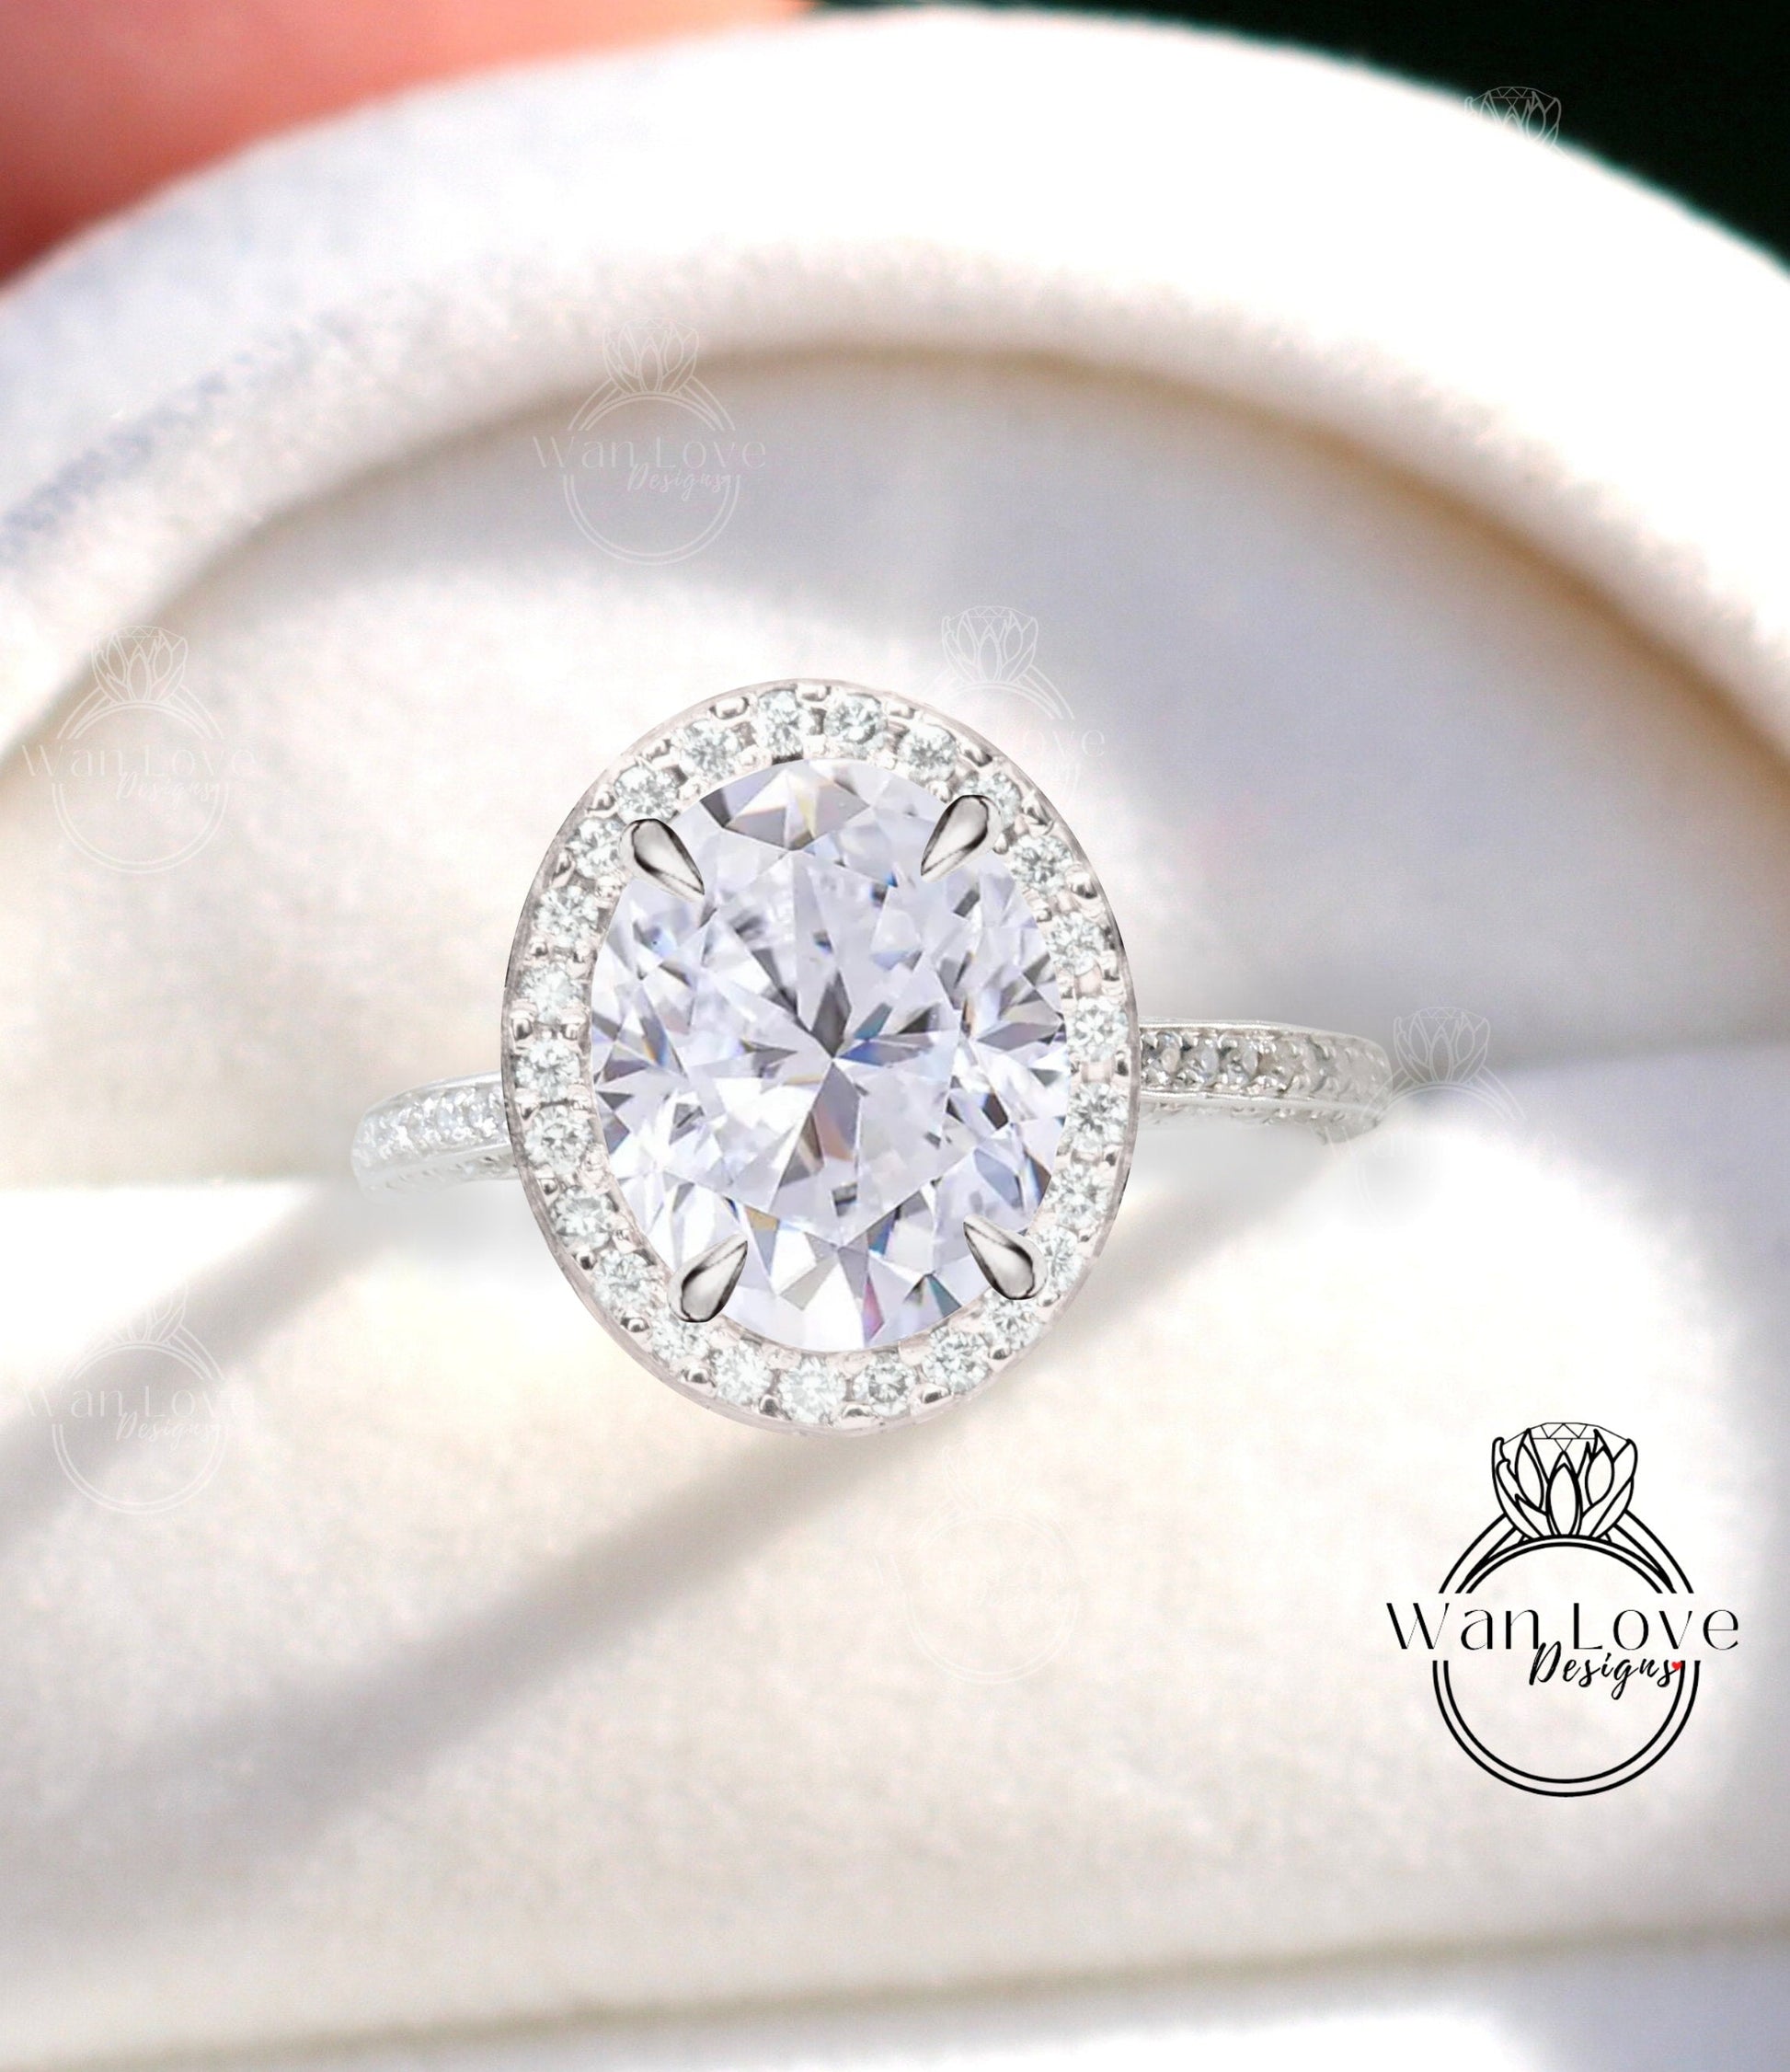 Moissanite engagement ring Oval shape vintage white gold ring antique art deco halo unique ring promise anniversary bridal ring wedding ring Wan Love Designs